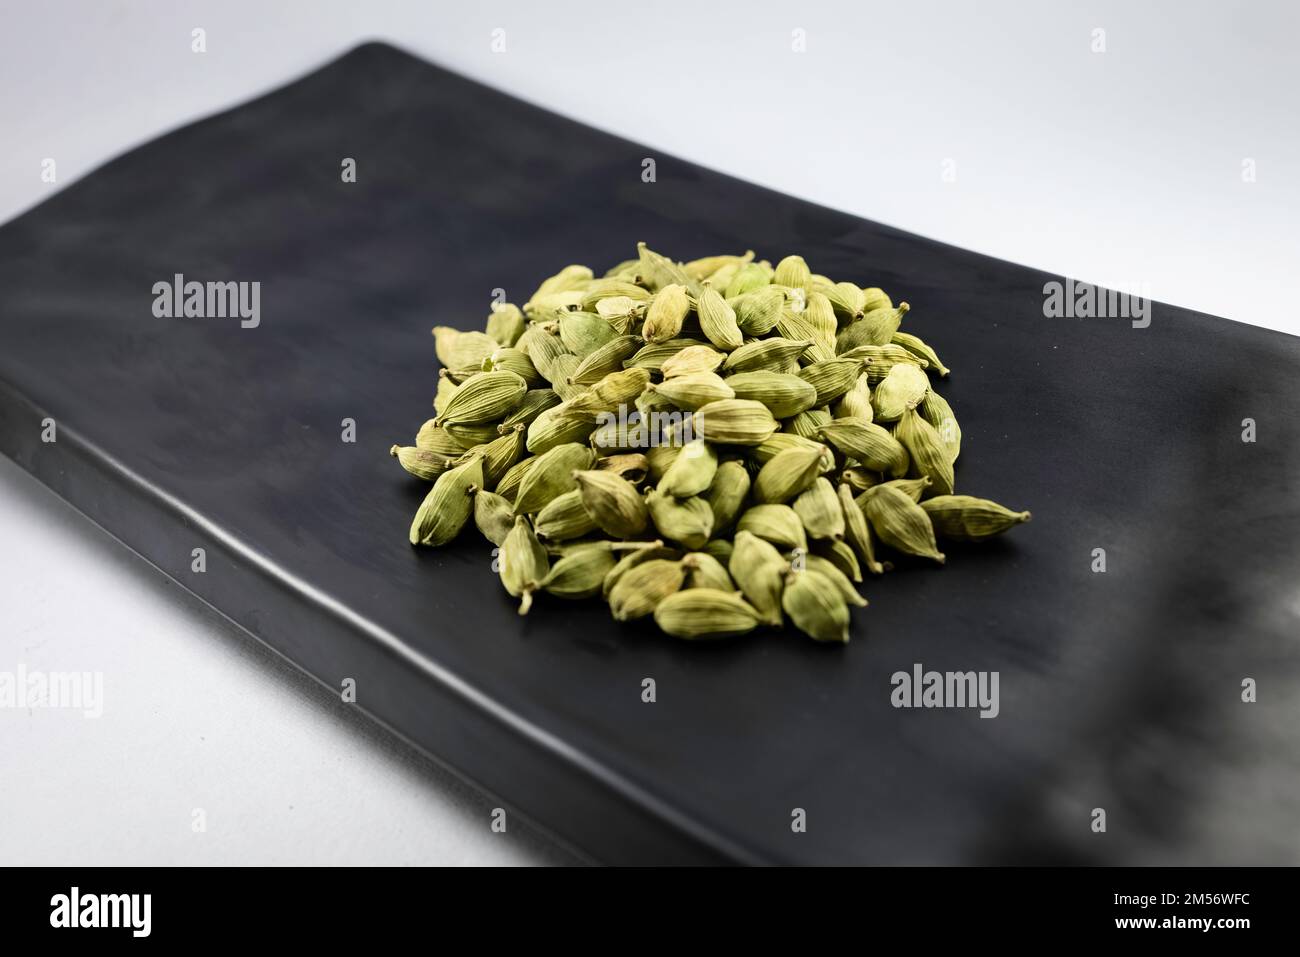 A closeup of green cardamom or green elaichi on black platter isolated on white background. Stock Photo